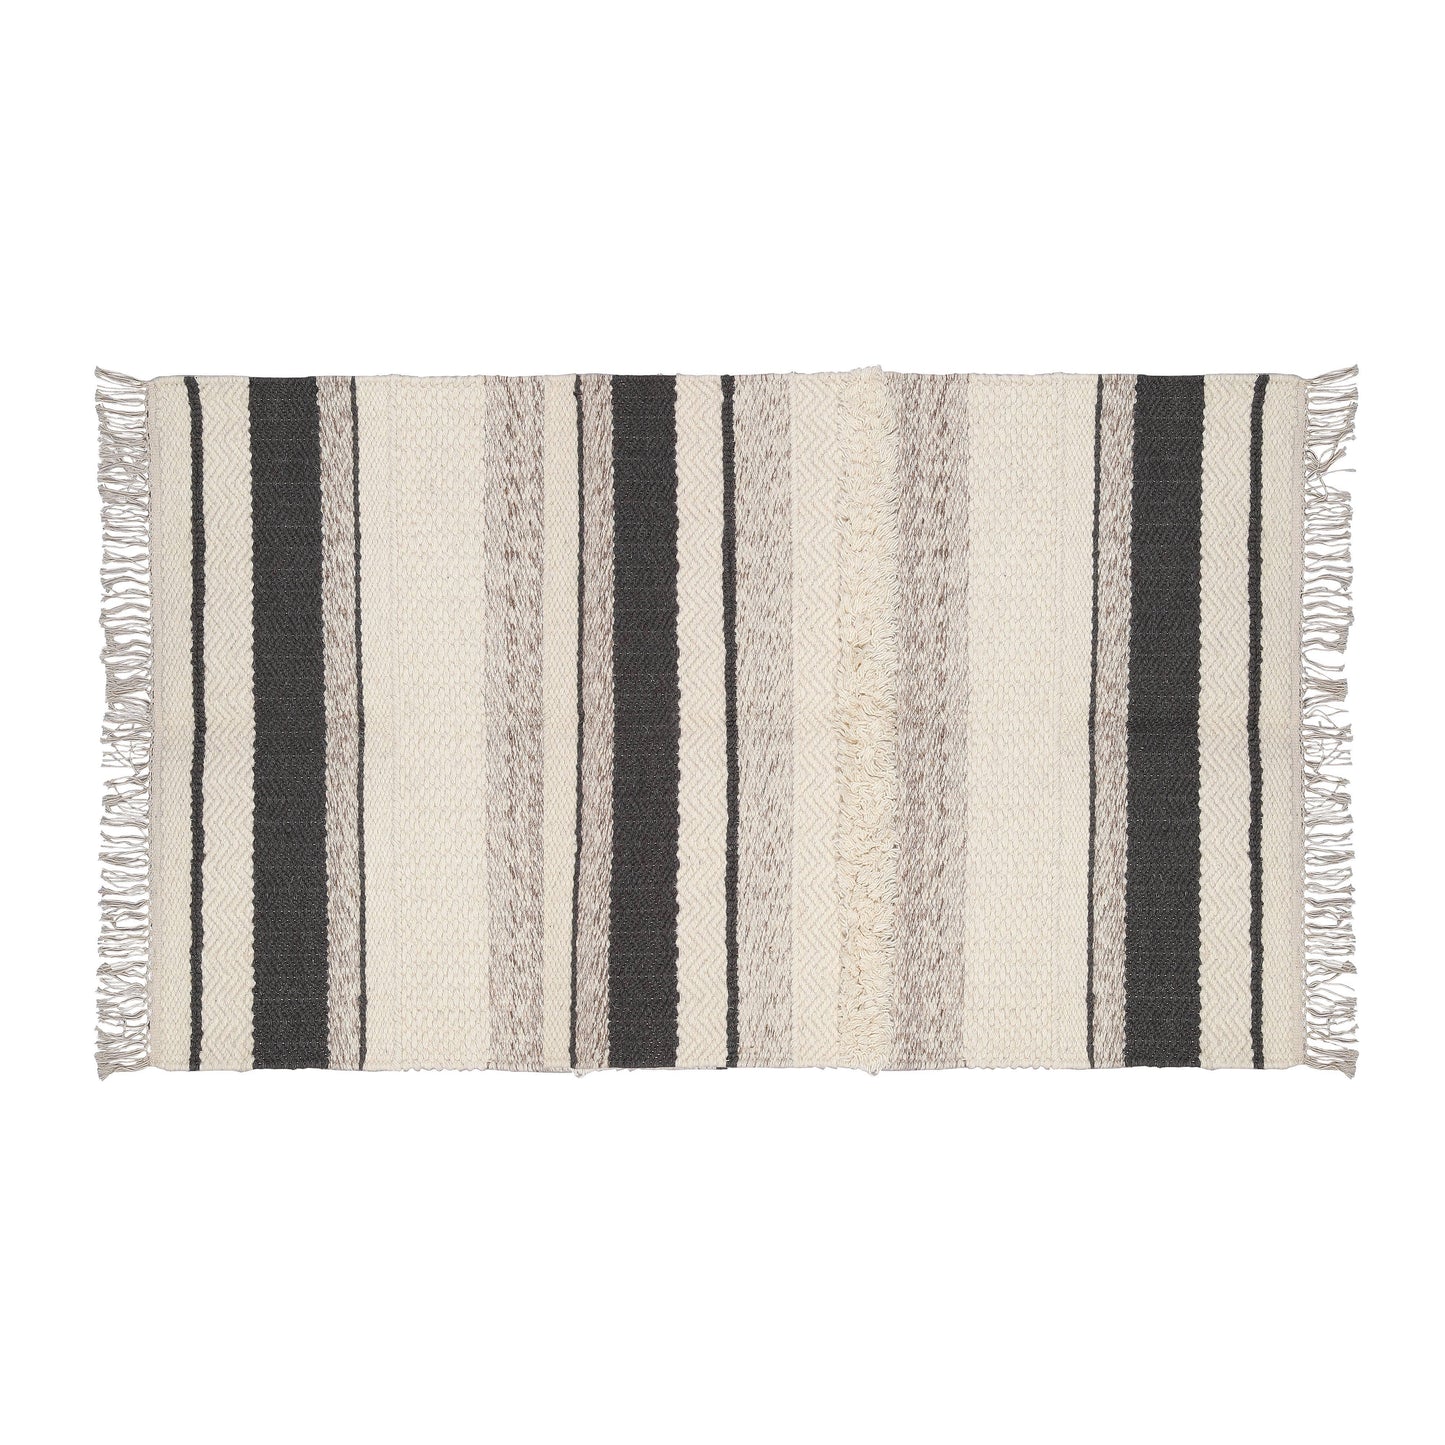 Hand Woven Wool Area Rug  Woven Gray White Stripes